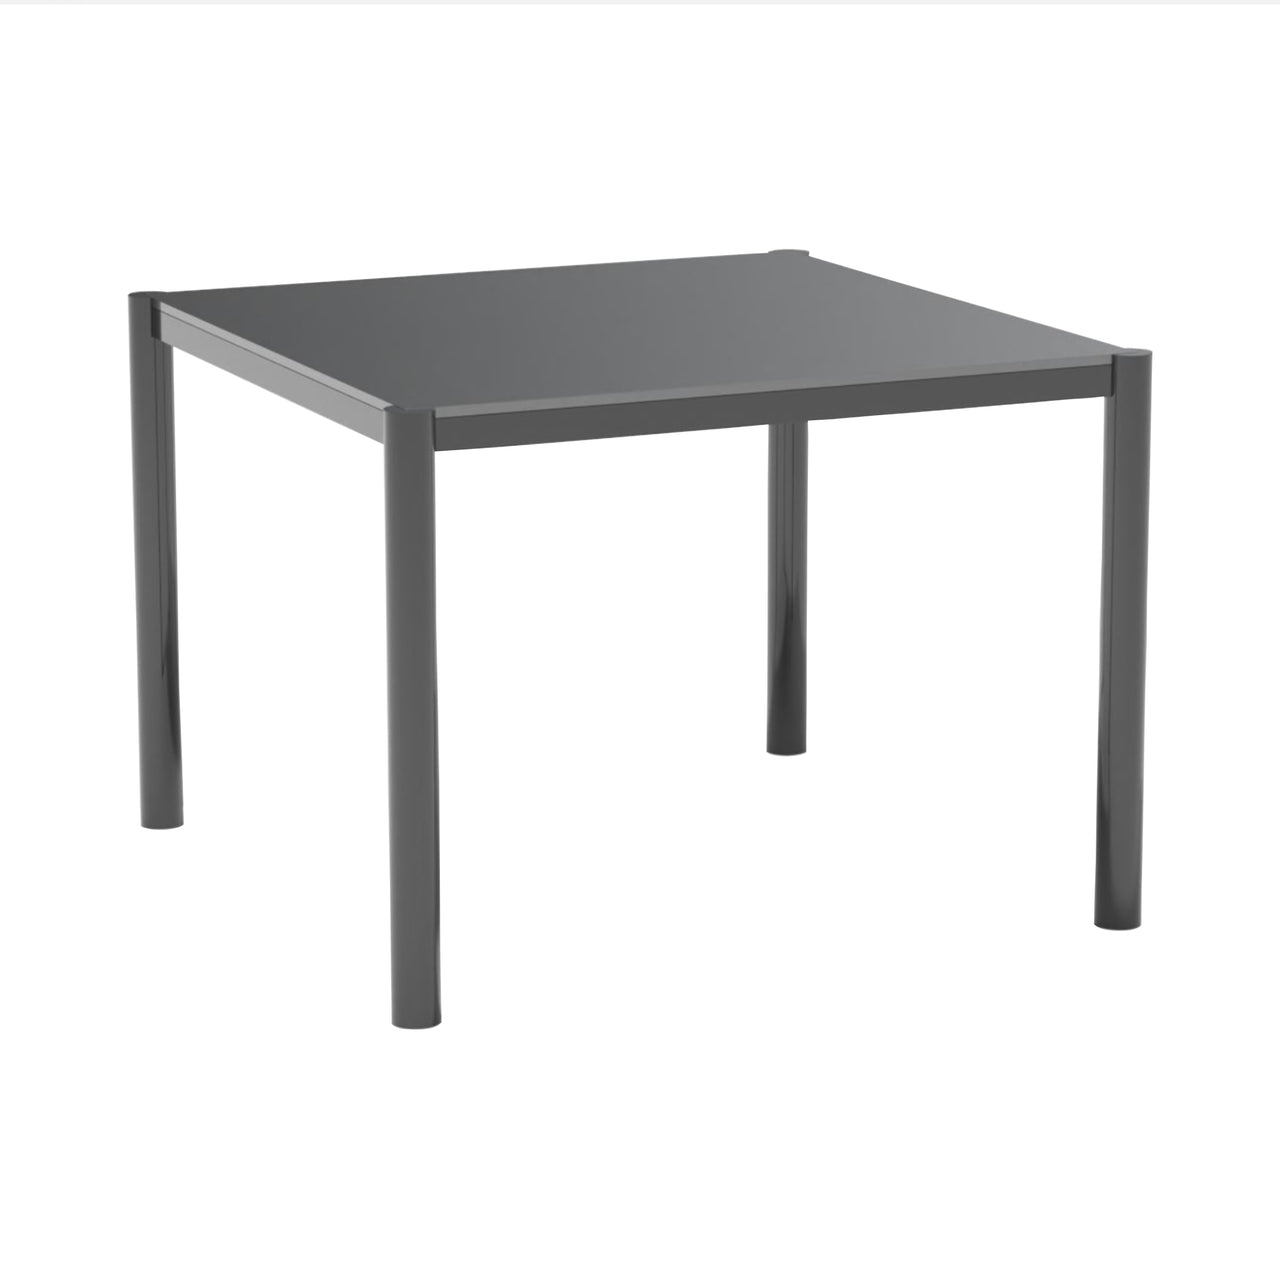 Get-Together Dining Table: Square + Black + Smoked Glass